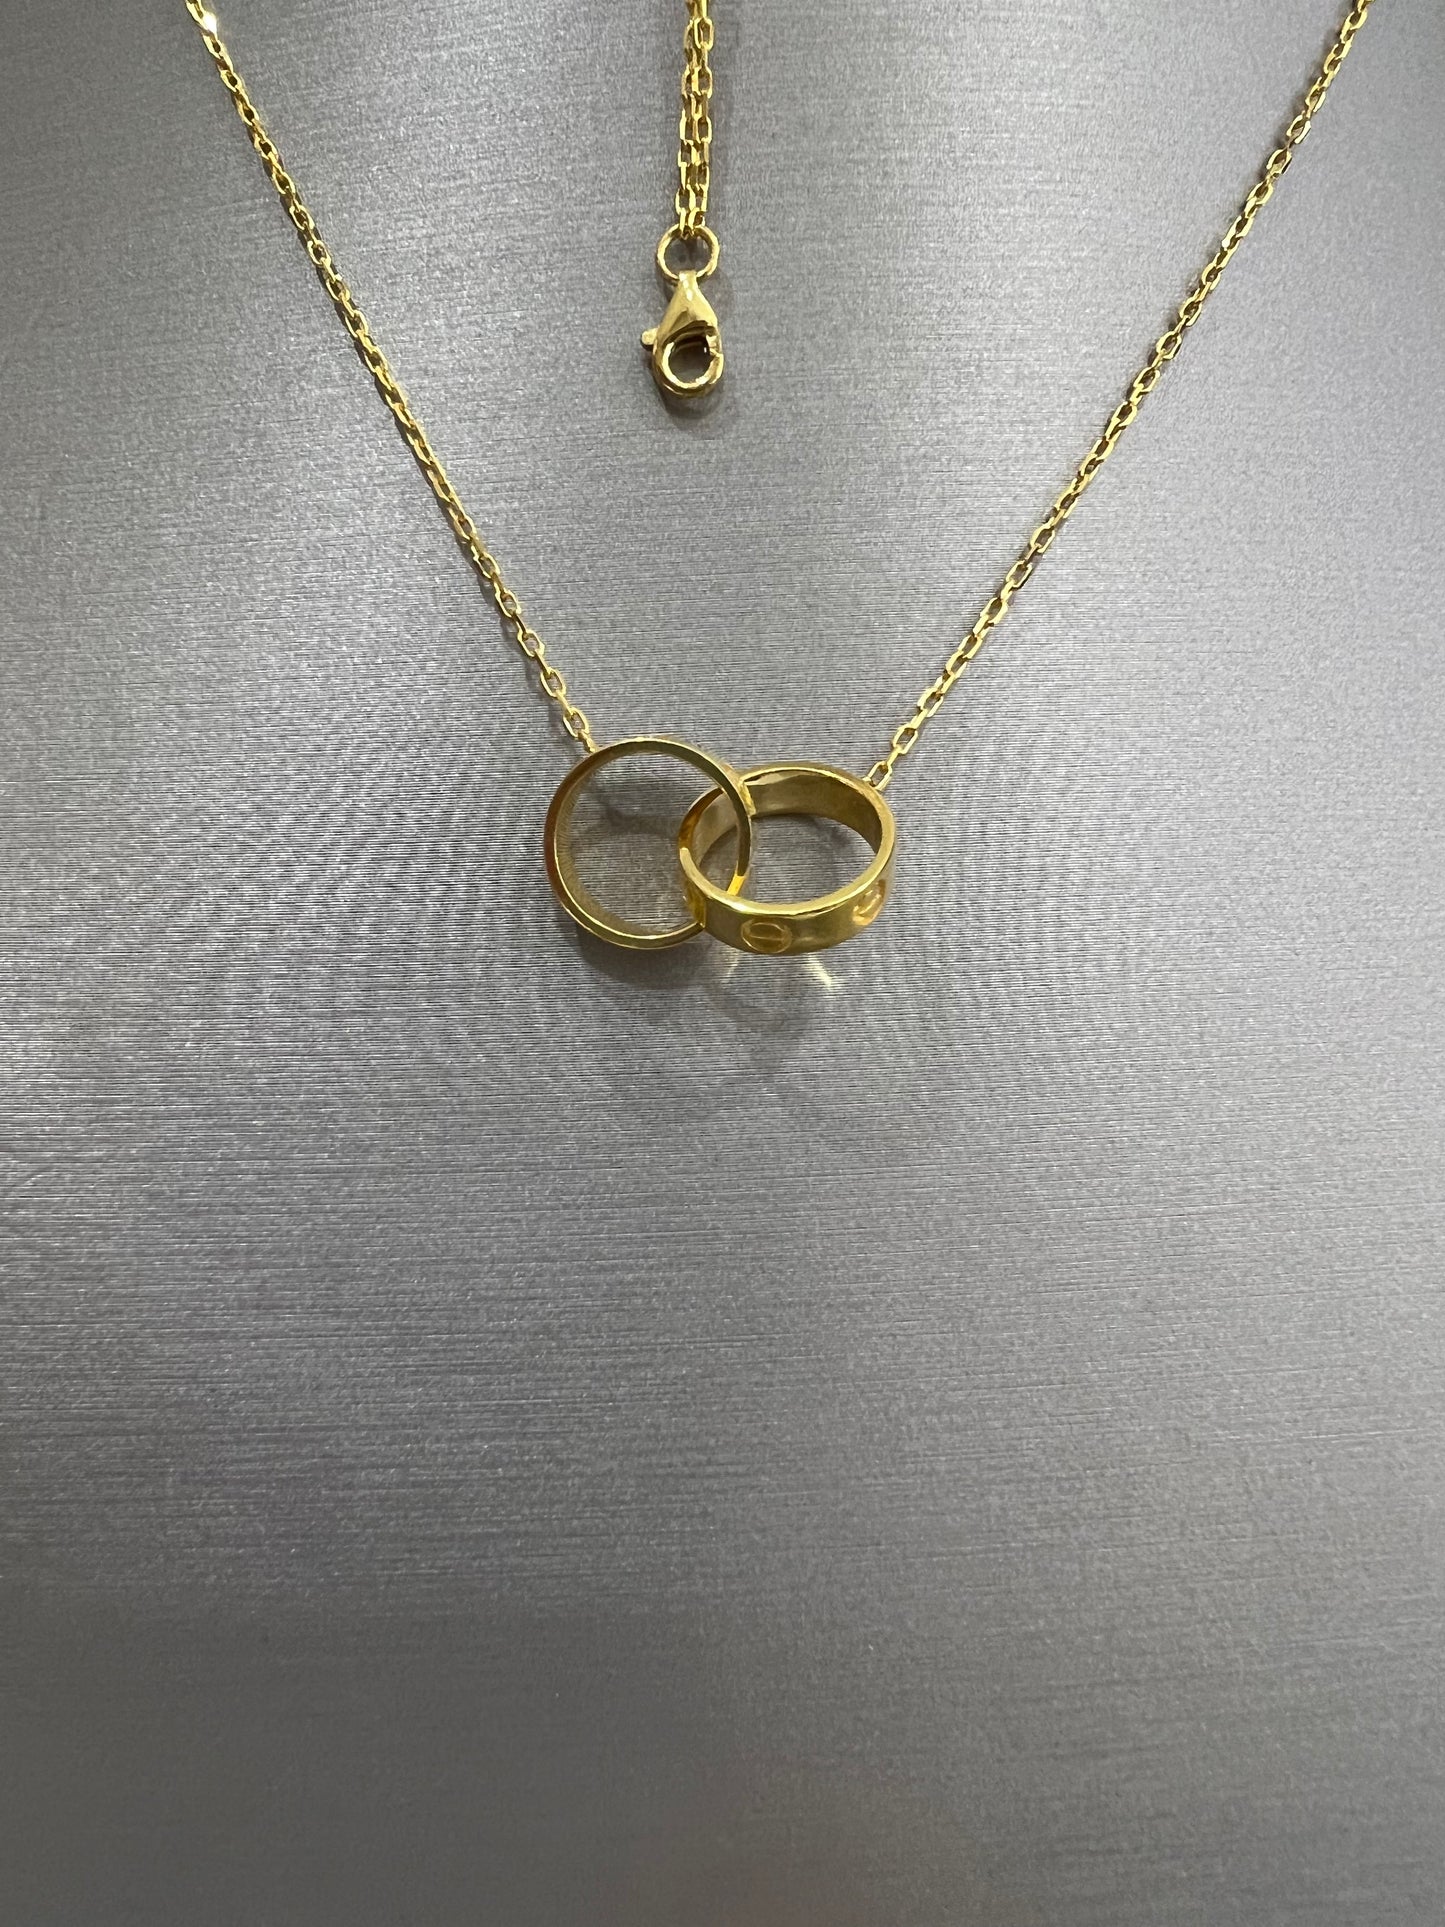 21k Gold Love Rings Necklace set